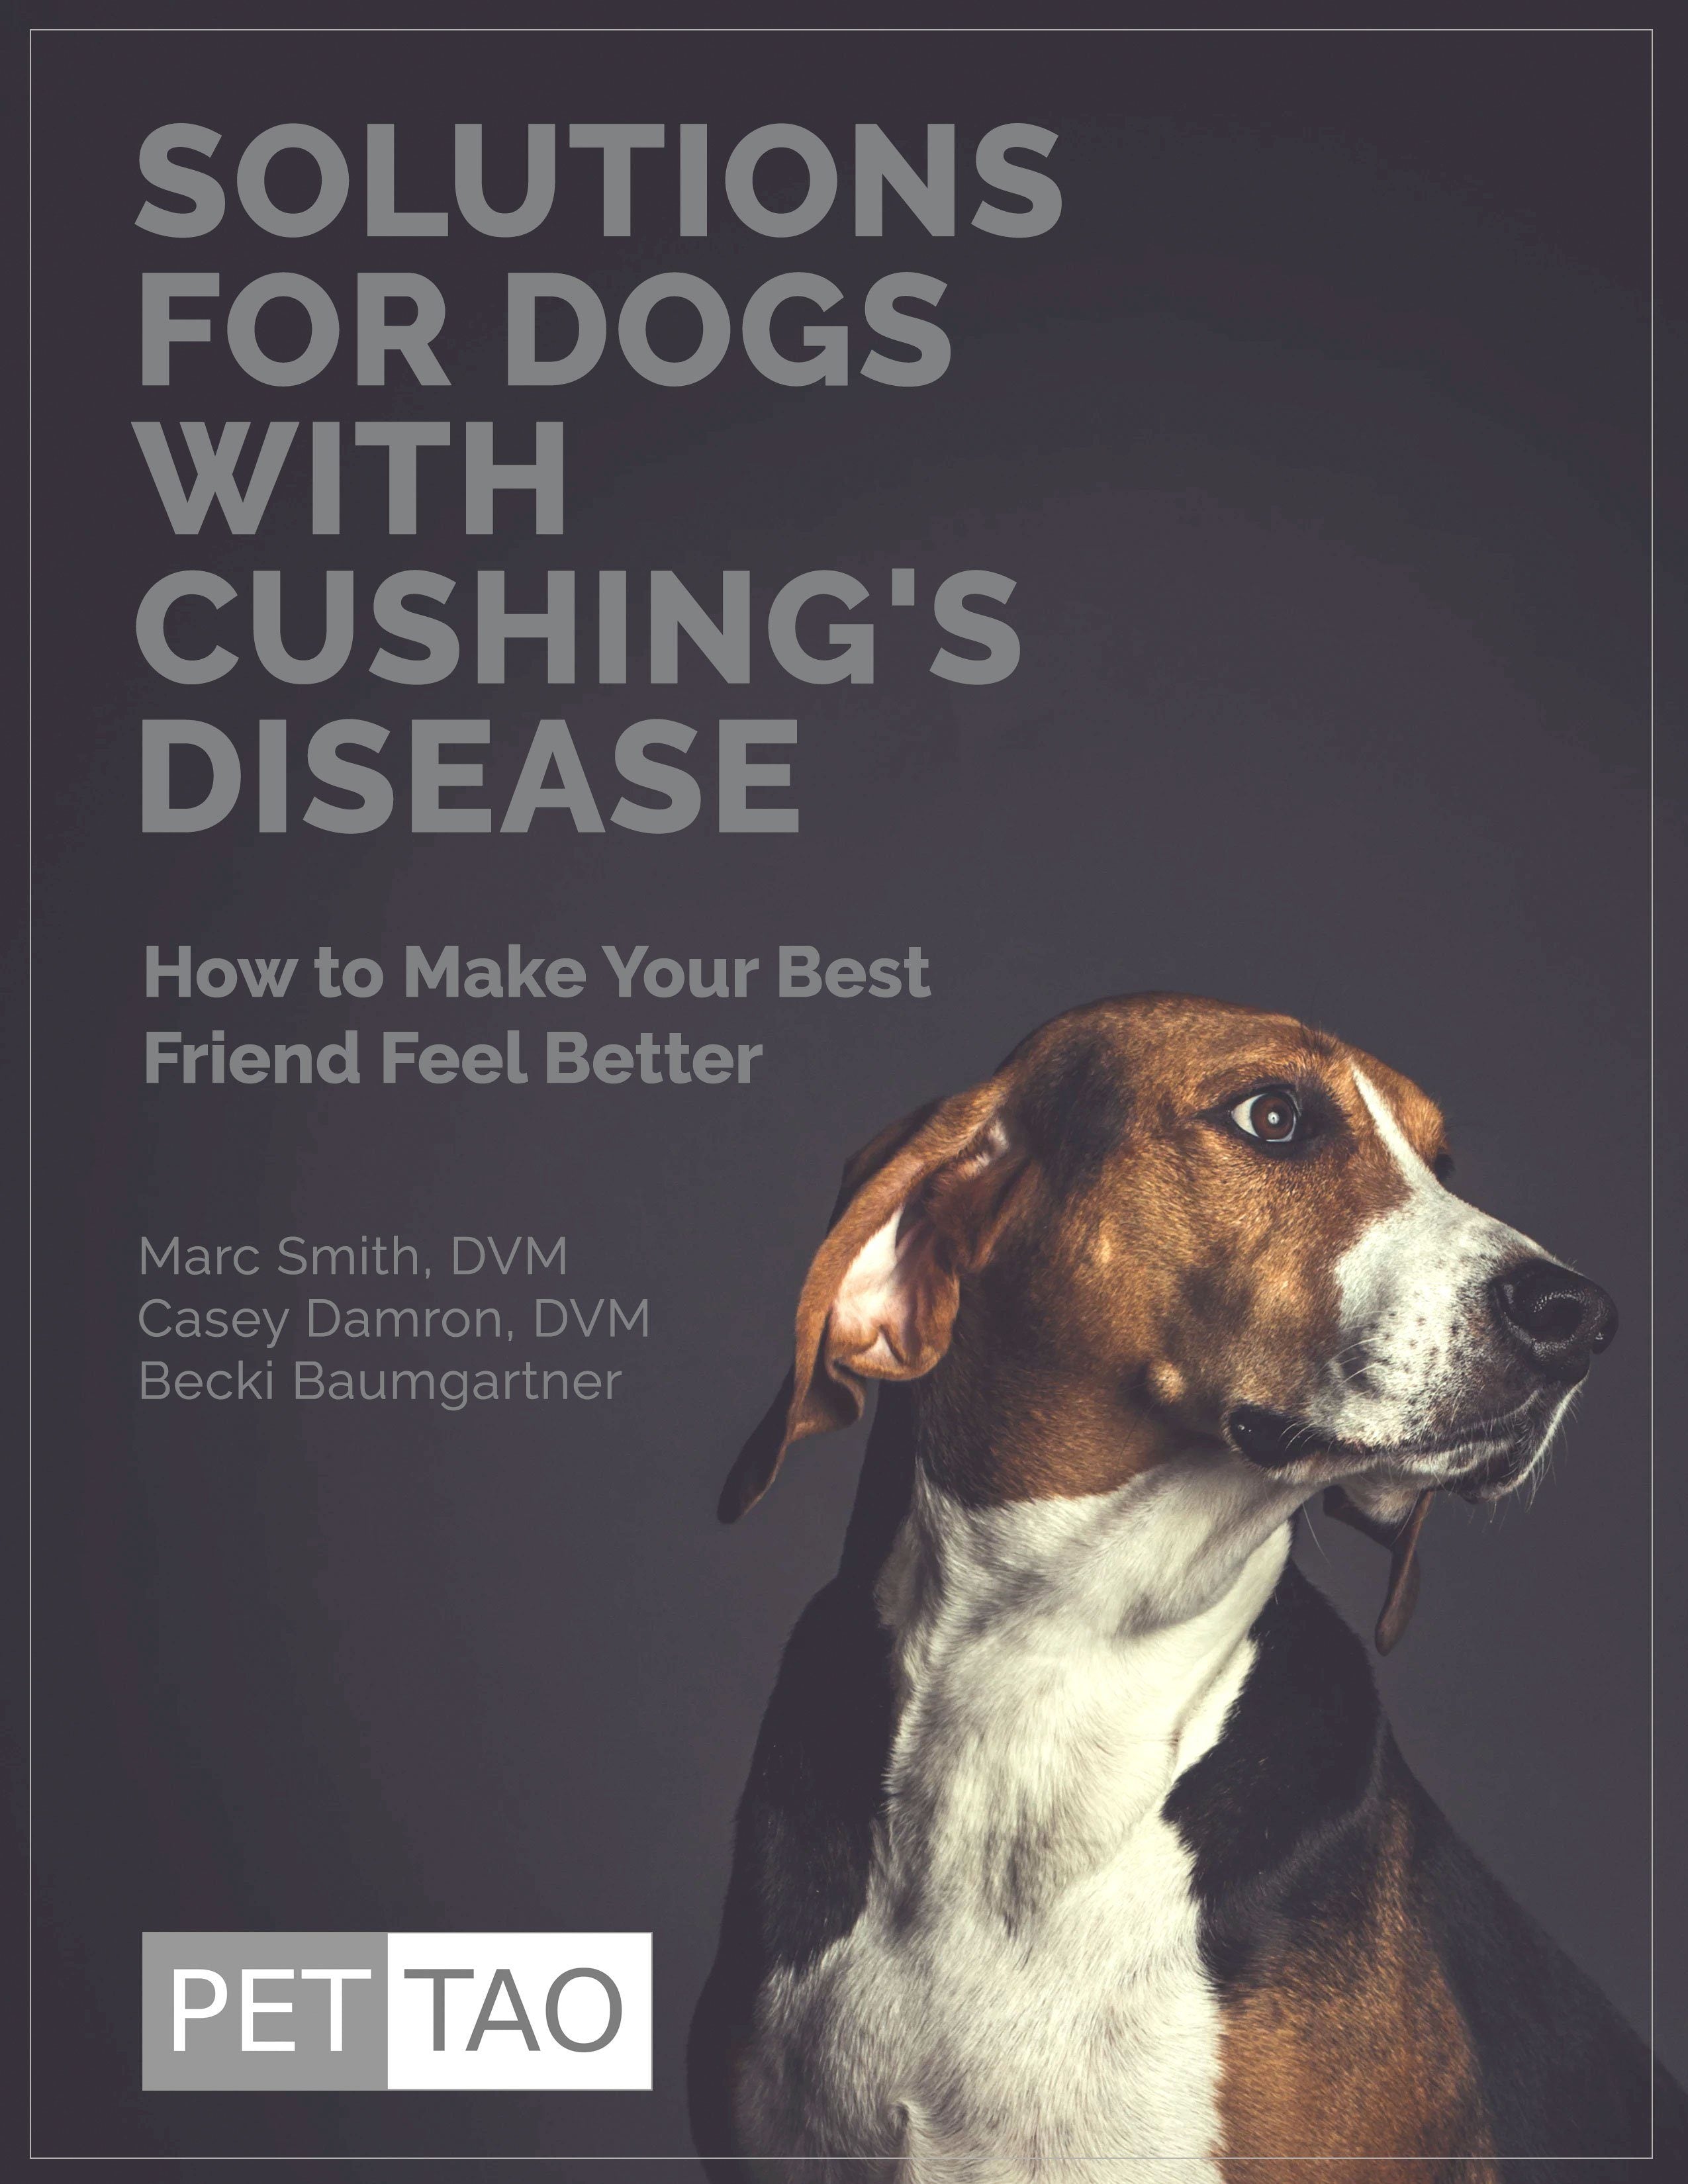 Solutions for Dogs With Cushing's Disease: How to Make Your Best Friend Feel Better ebook cover